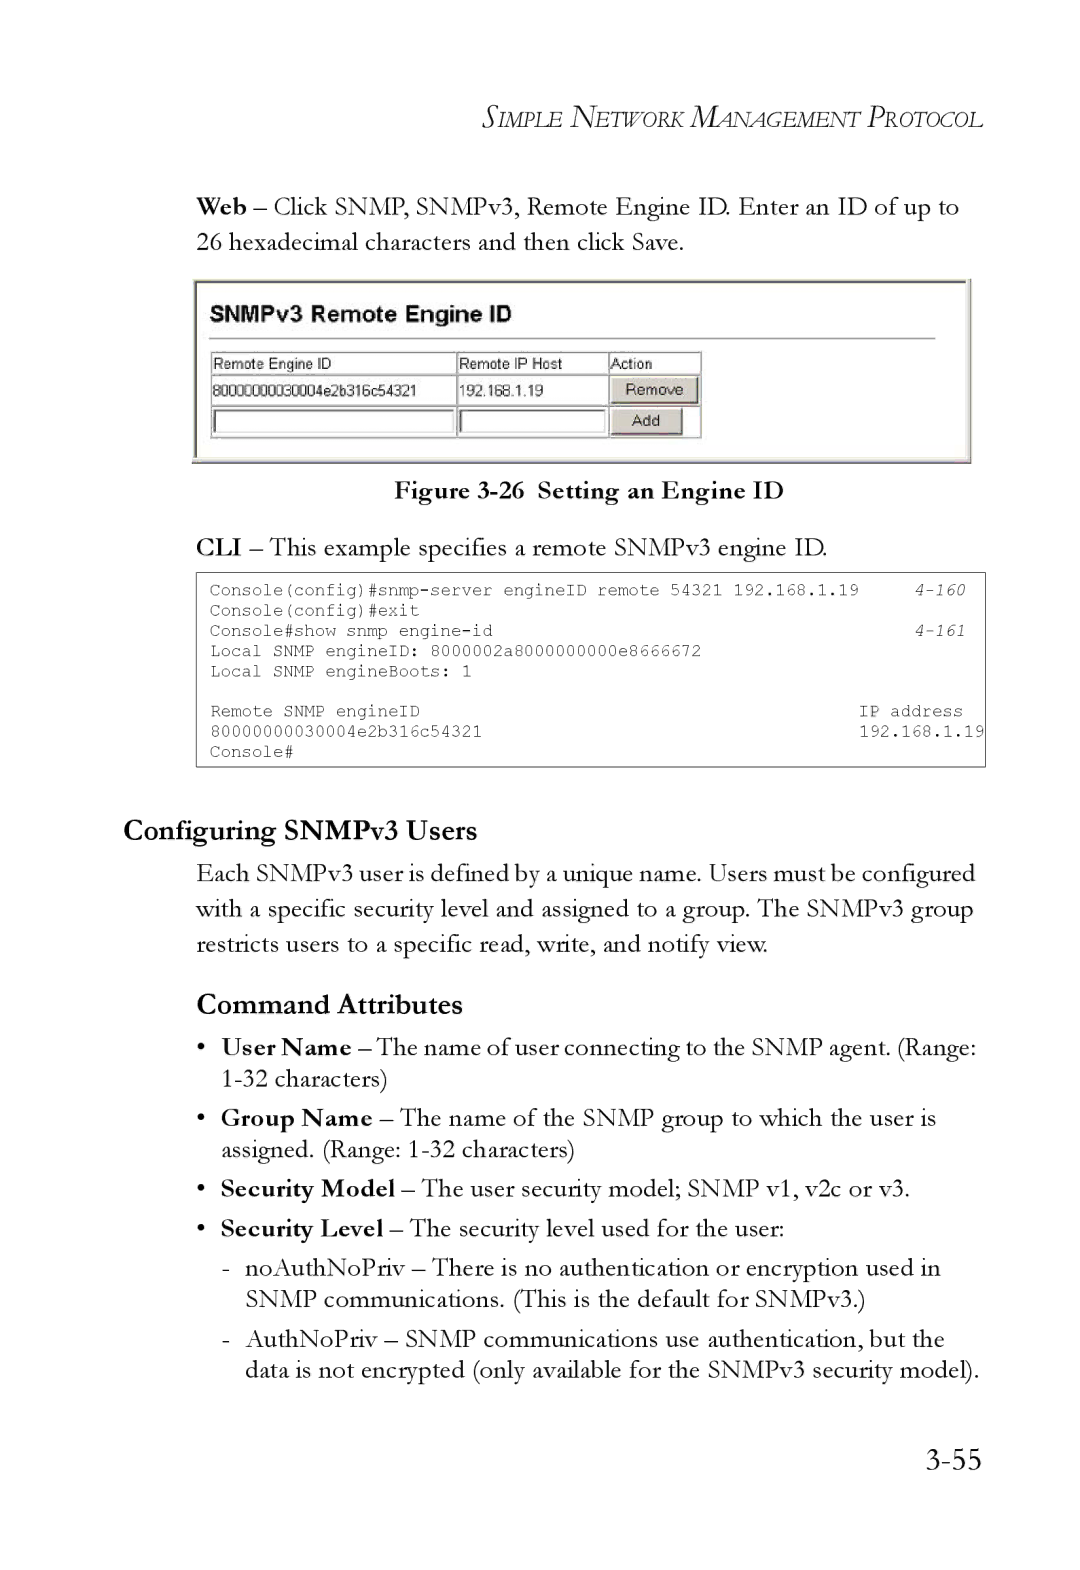 SMC Networks SMC6824M manual Configuring SNMPv3 Users, CLI This example specifies a remote SNMPv3 engine ID 